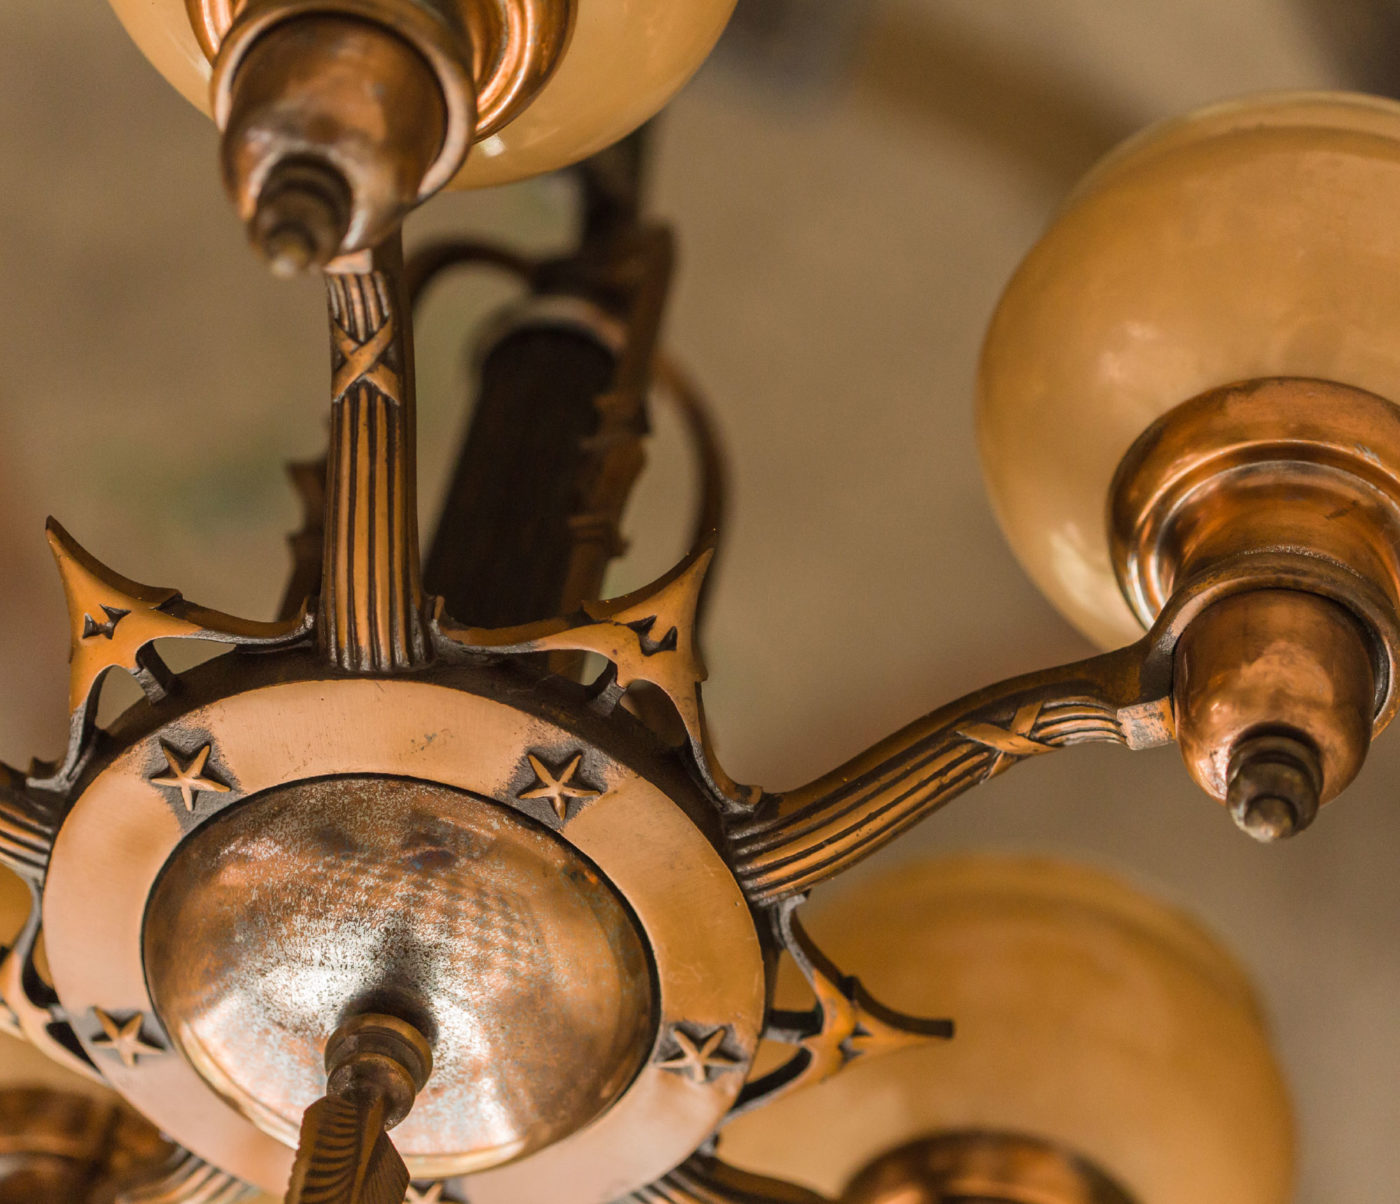 A detail photo of an ornate light fixture inside the building.